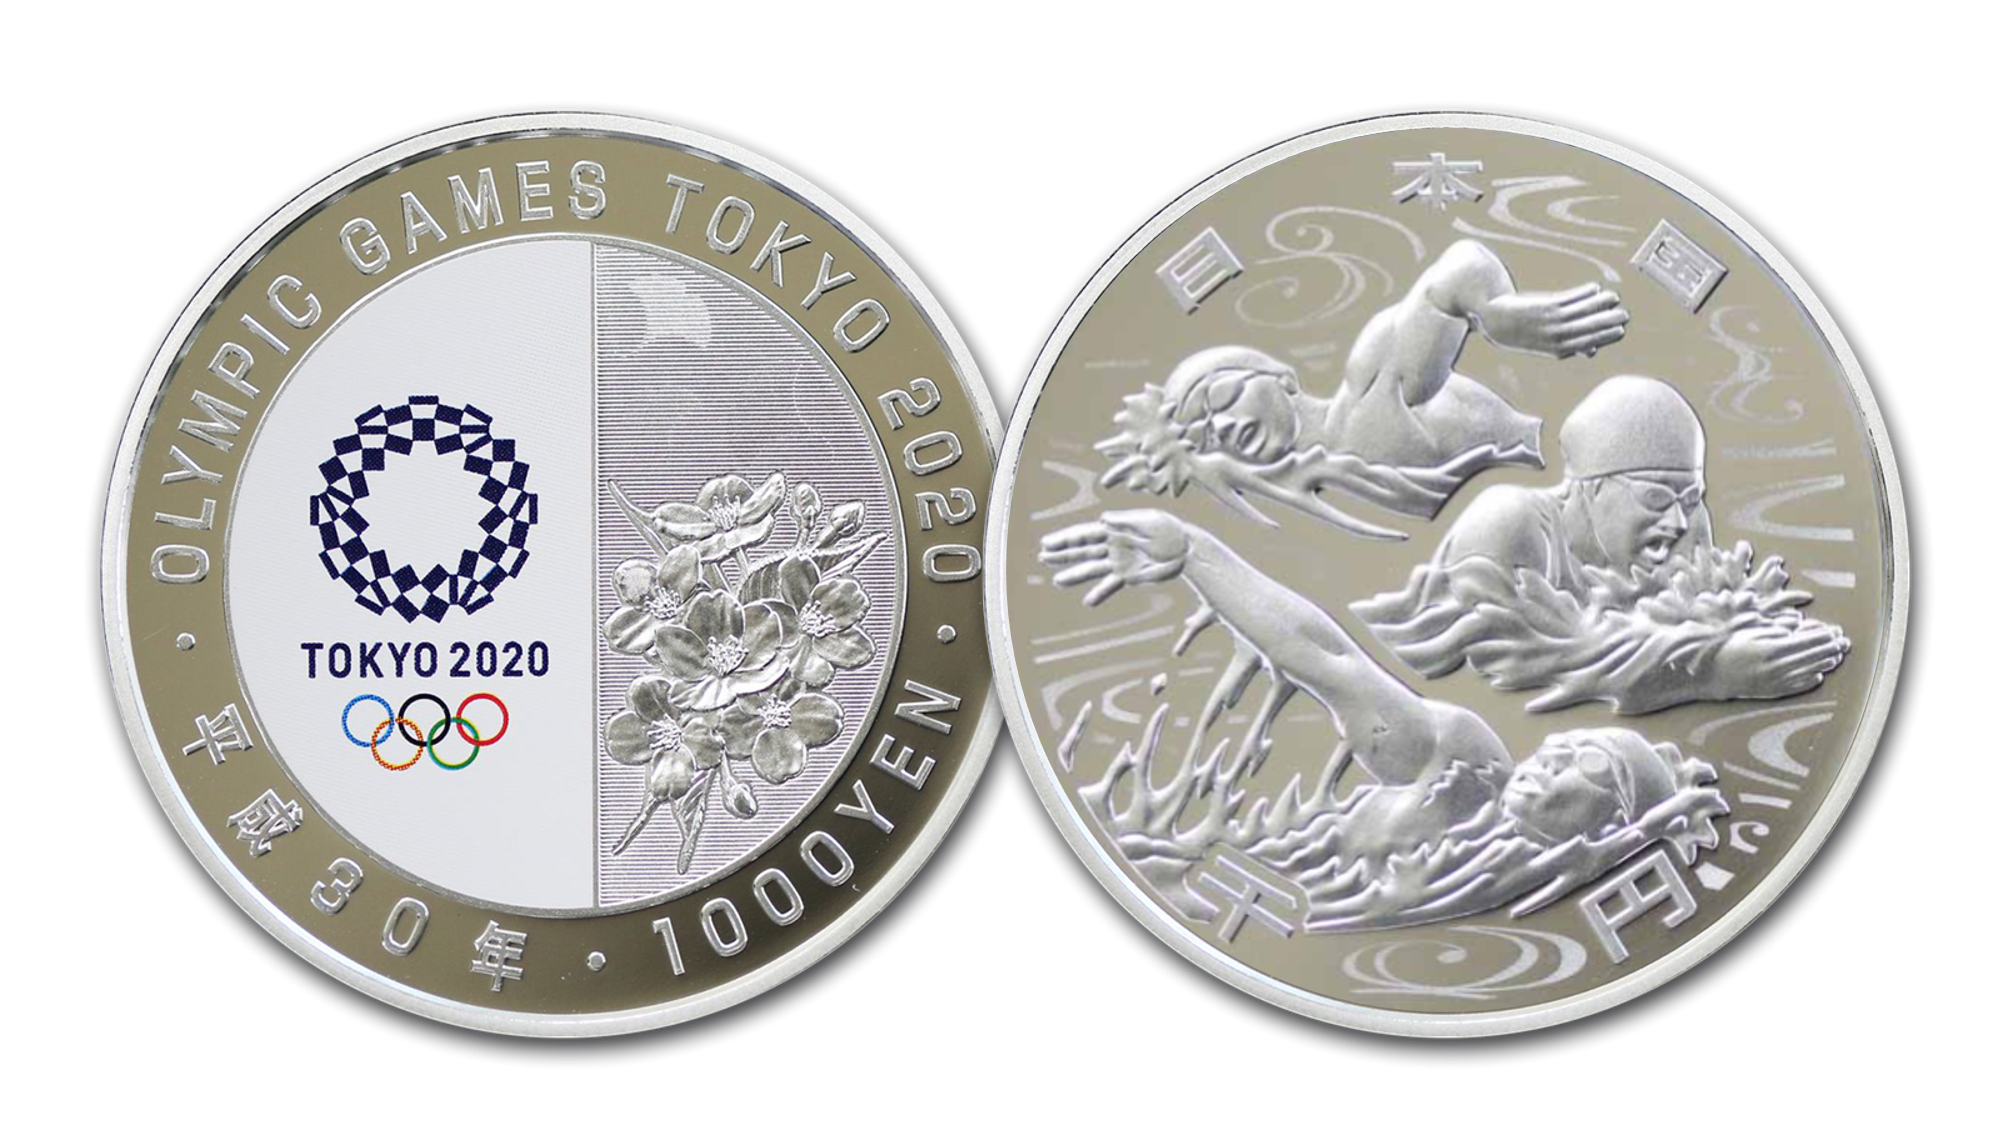   Pure Silver Commemorative coin struck in honour of one of, if not the greatest sporting spectacles on earth!